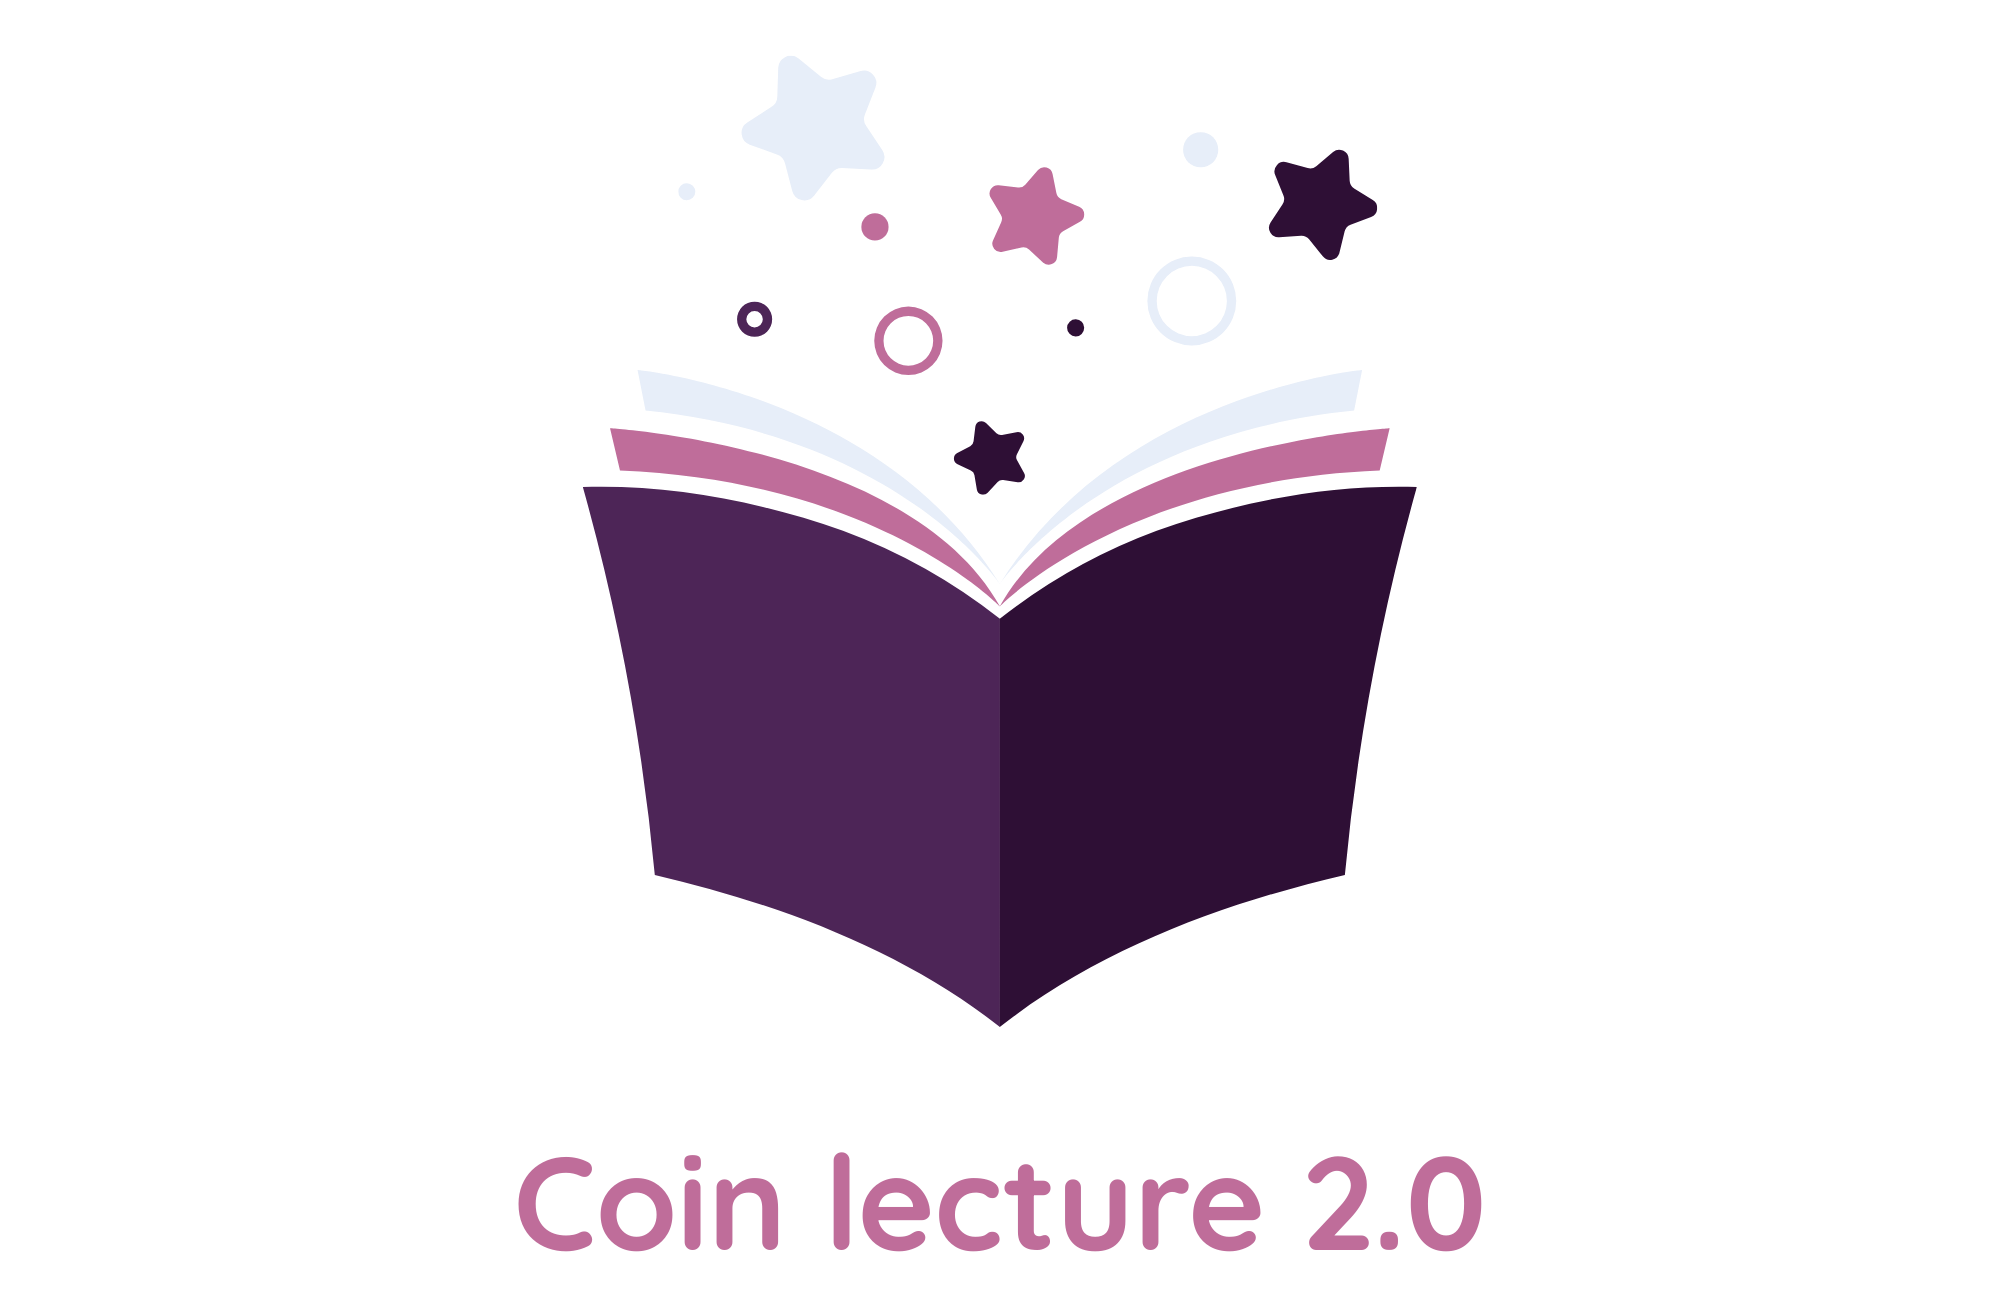 Coinlecture 2.0